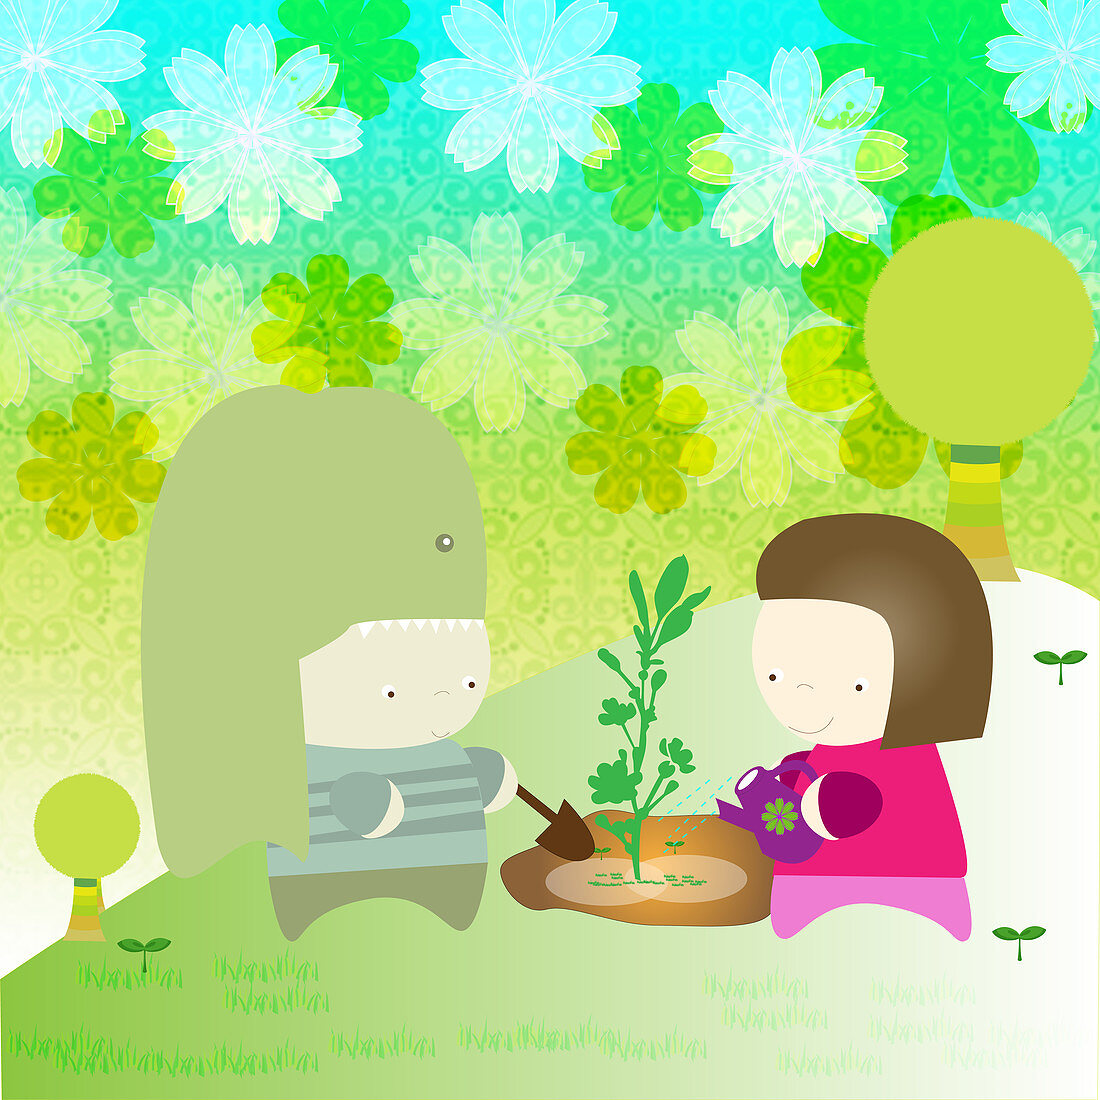 Girl watering plant with a watering can, illustration